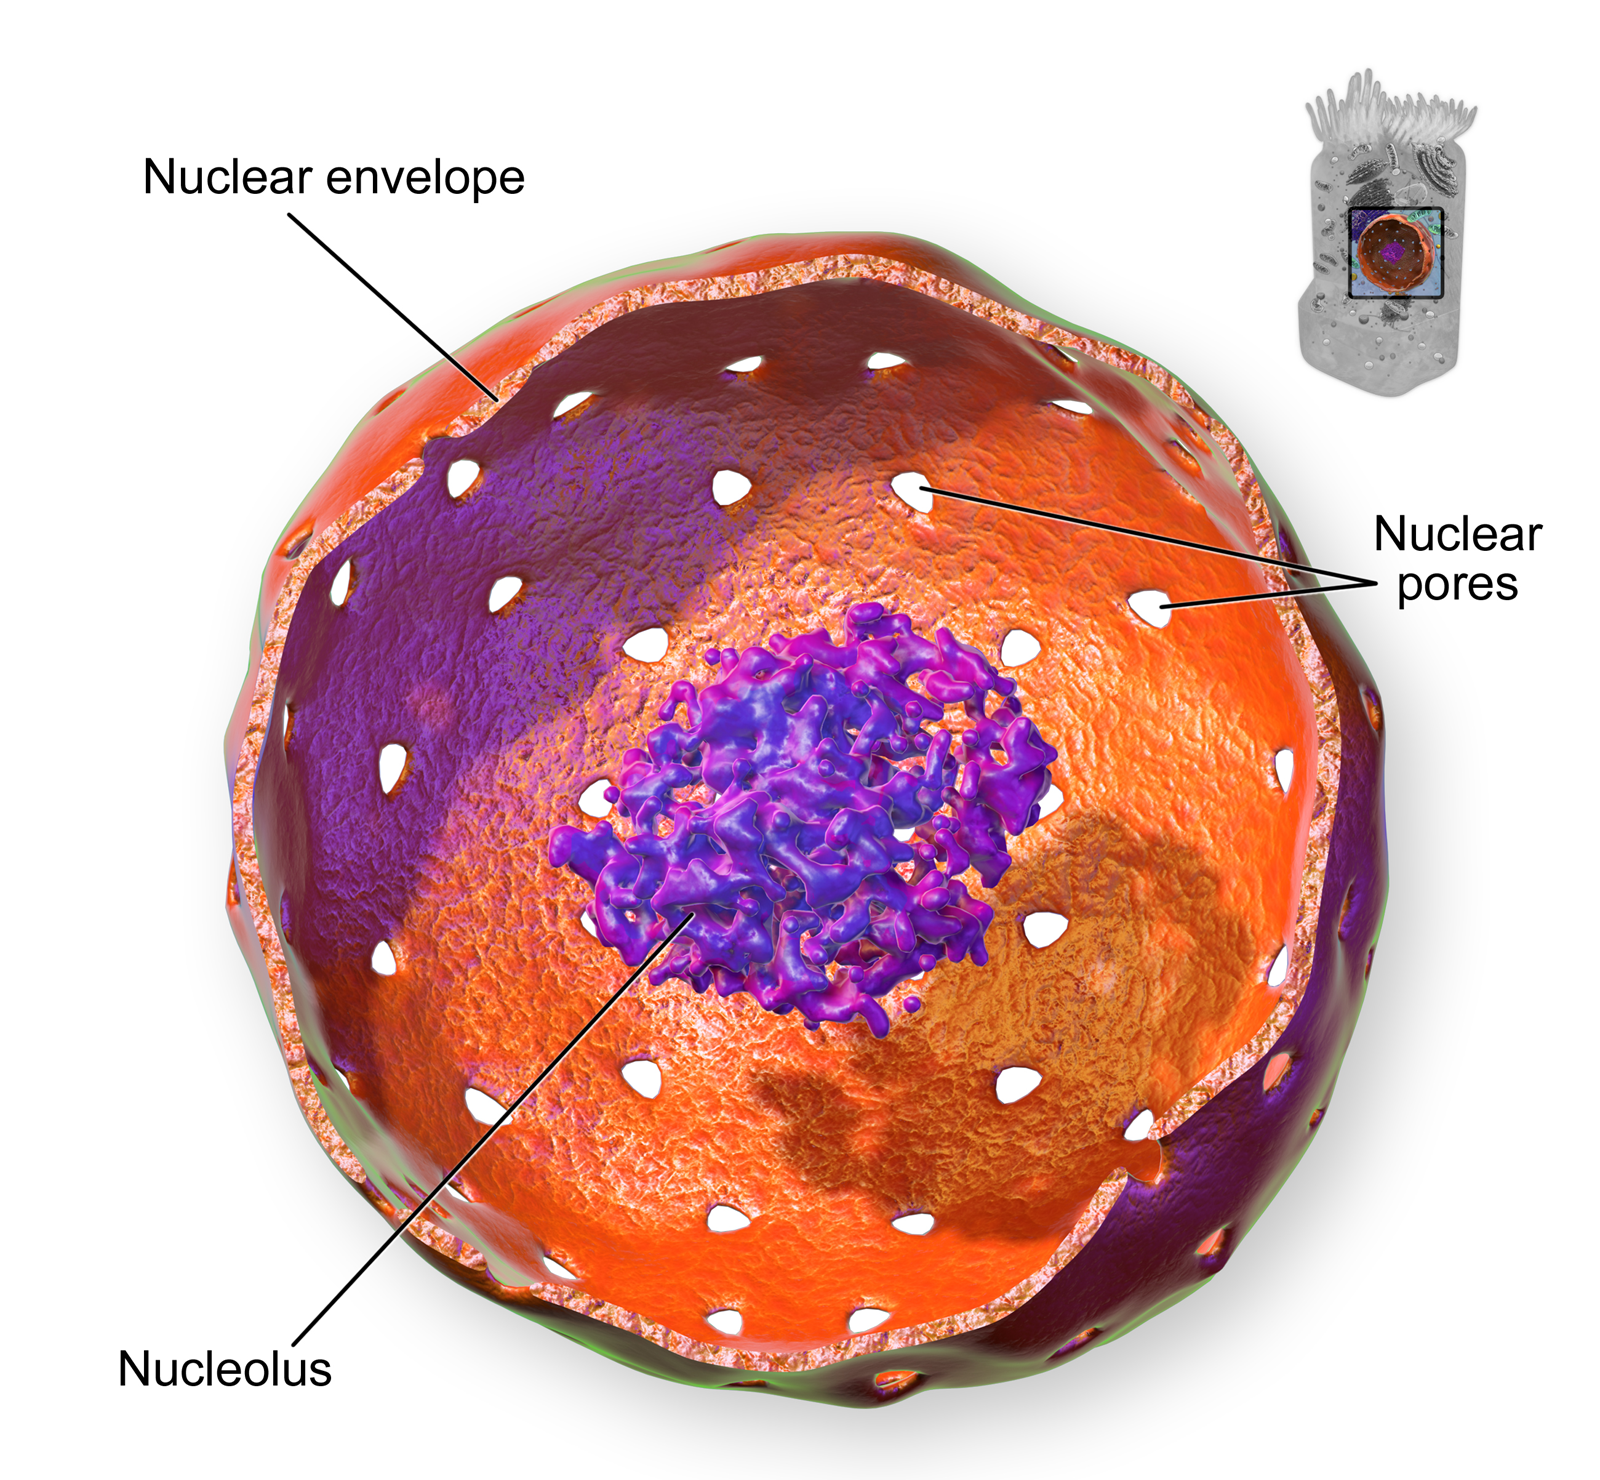 This closeup of a cell nucleus shows that it is surrounded by a structure called the nuclear envelope, which contains tiny perforations, or pores. The nucleus also contains a dense center called the nucleolus.